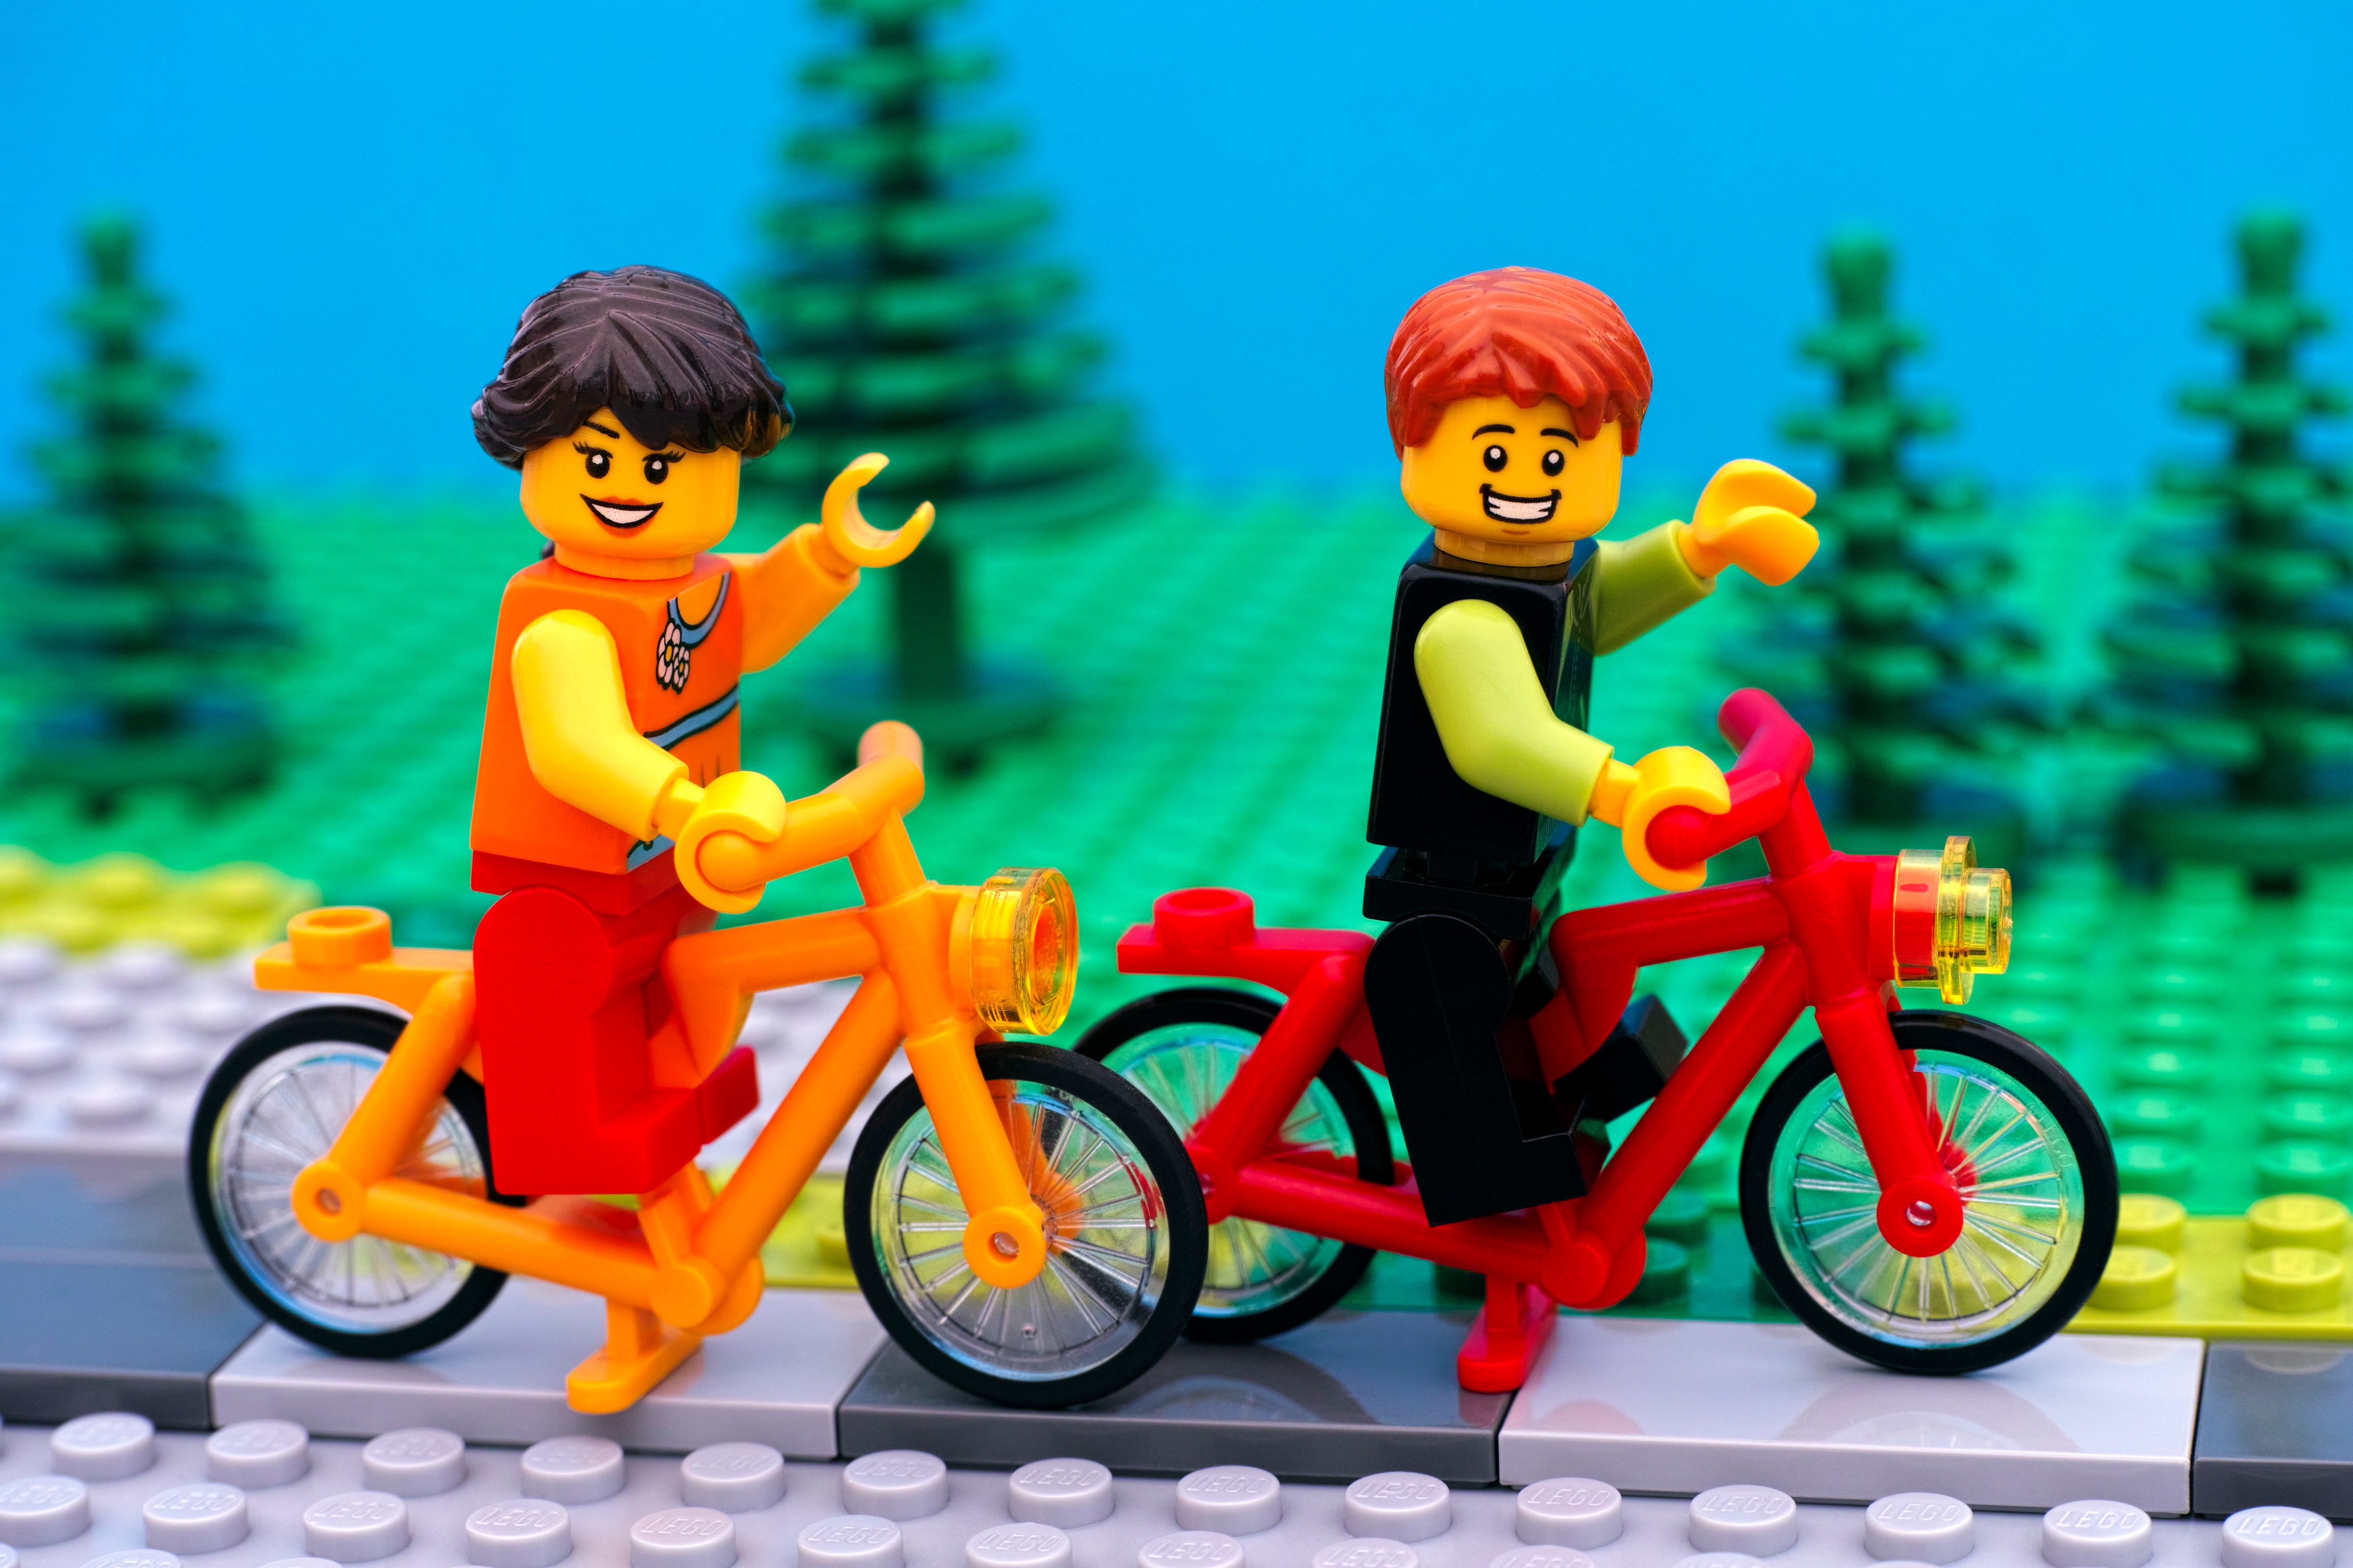 Lego boy and girl riding bikes in park